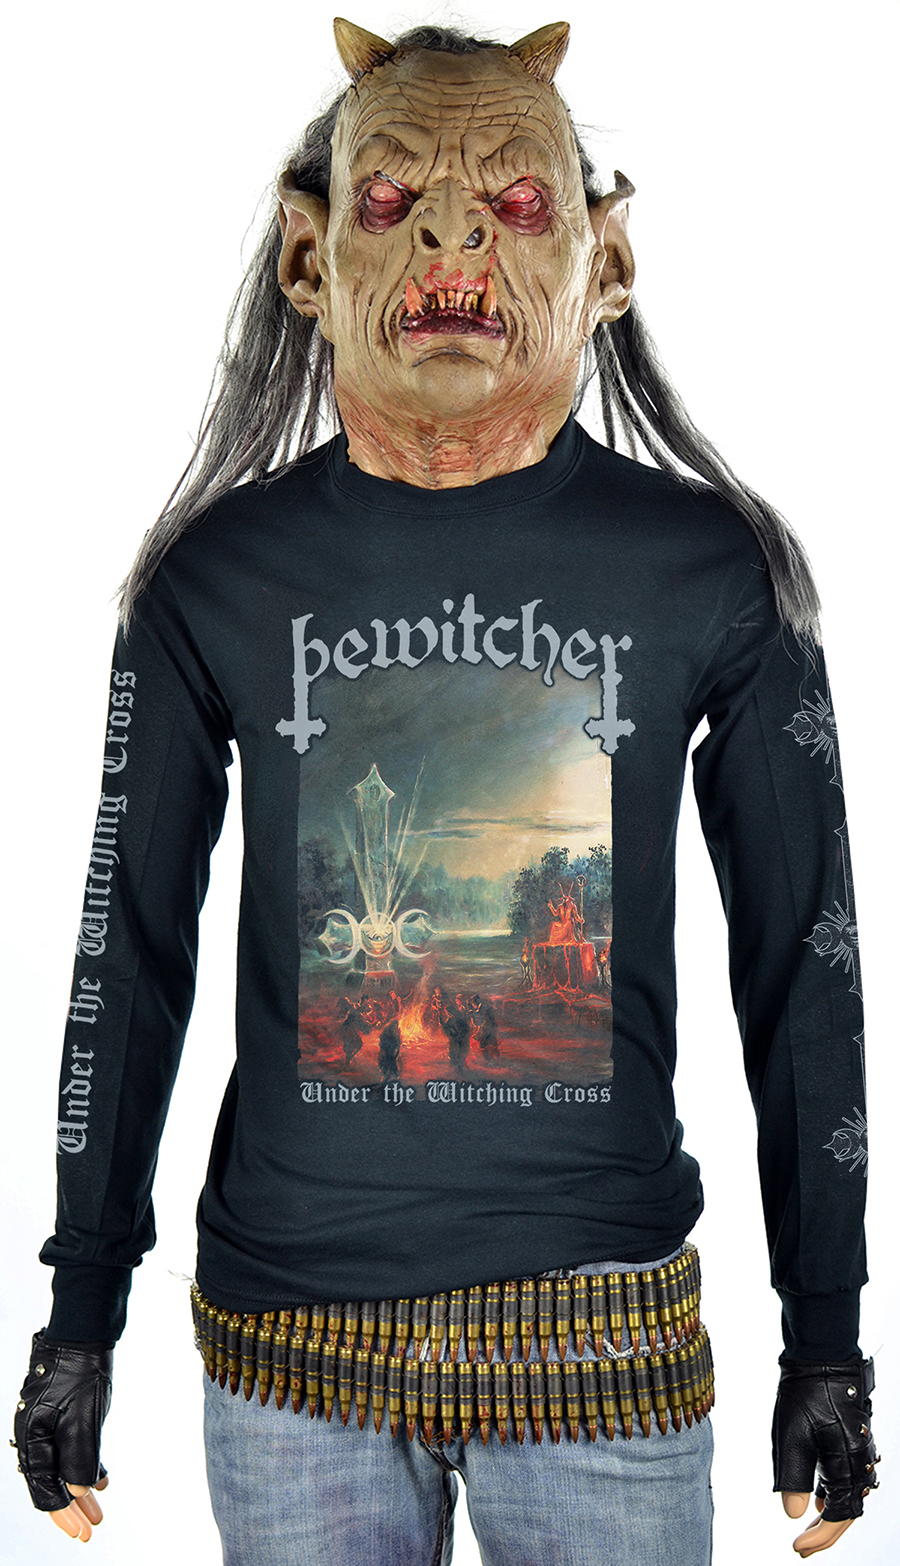 BEWITCHER - Under The Witching Cross (Album Cover)